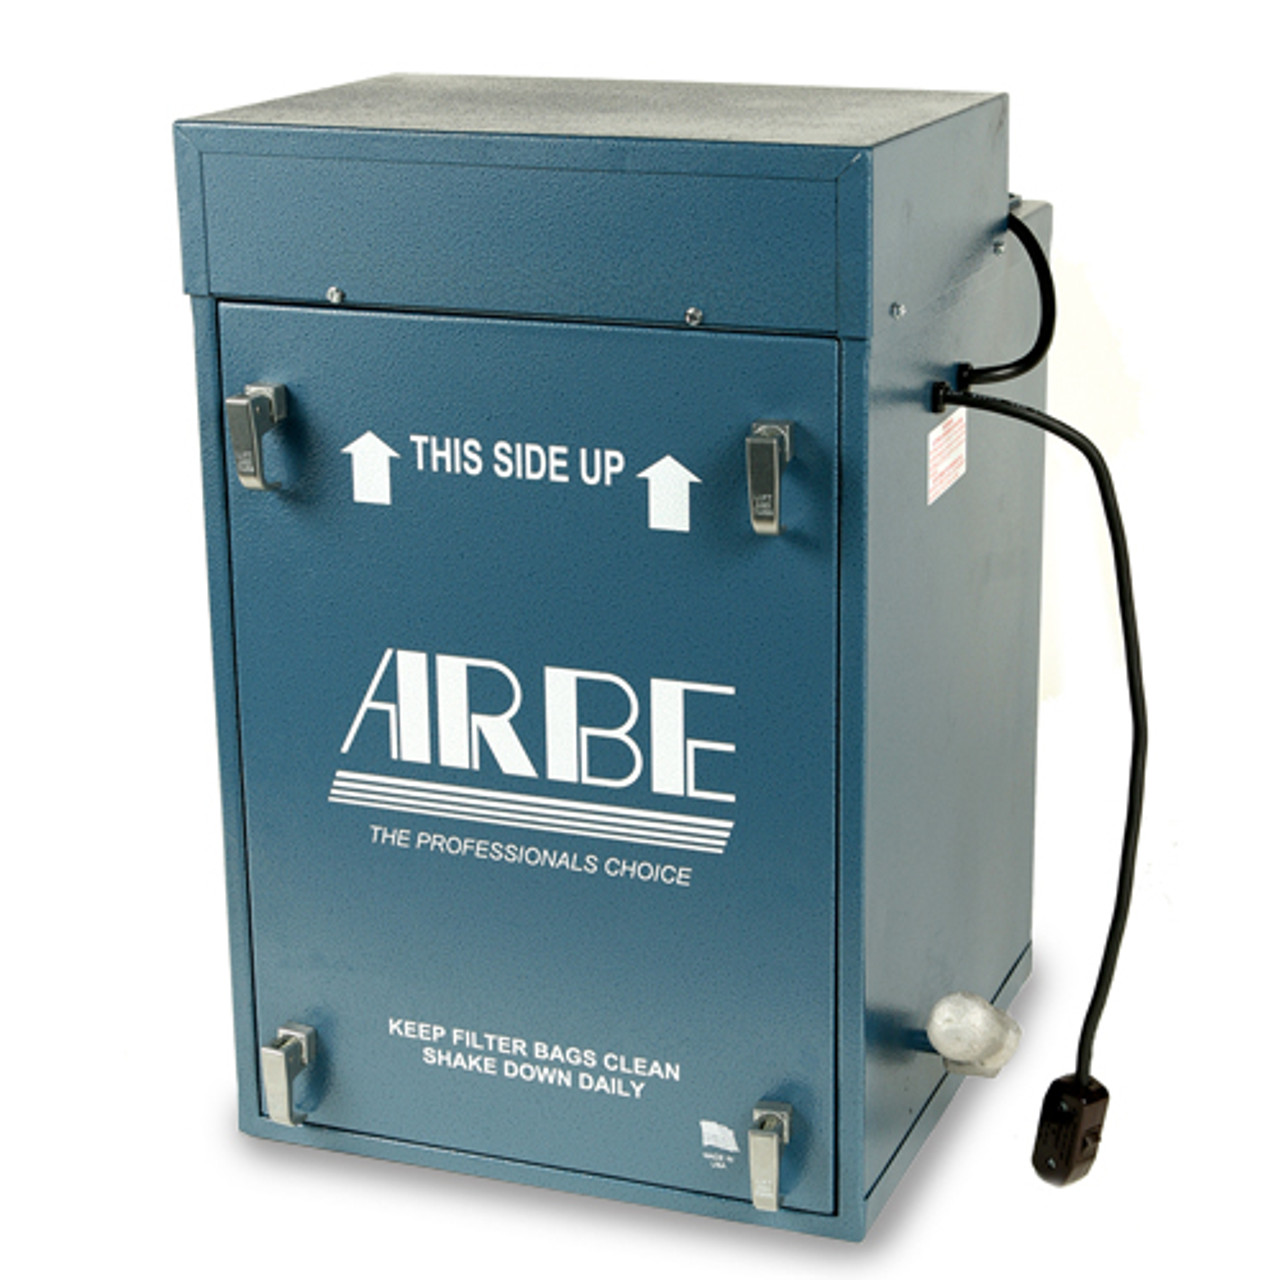 ARBE Model 1/2 HP Dust Collector - 110V